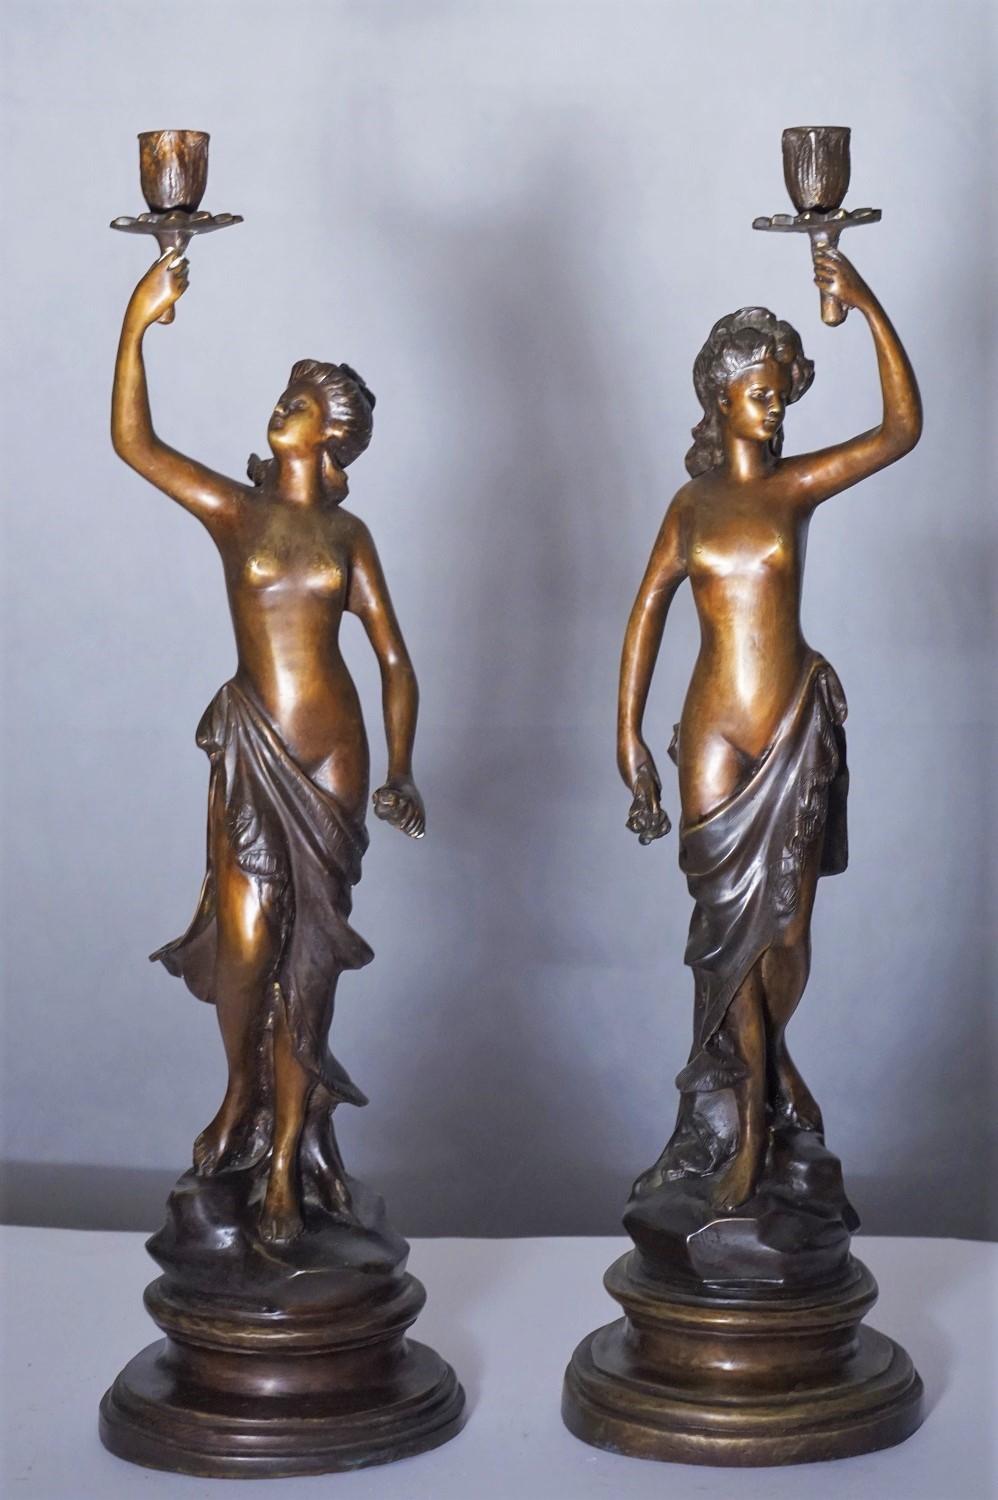 A pair of heavy patinated bronze sculpture candelabra, France mid-19th century. Two female sculptures holding a candleholder raised on a bronze circular base, signed by the artist.
Measures:
Height 21 in / 54 cm
Base diameter 6 in / 15 cm.